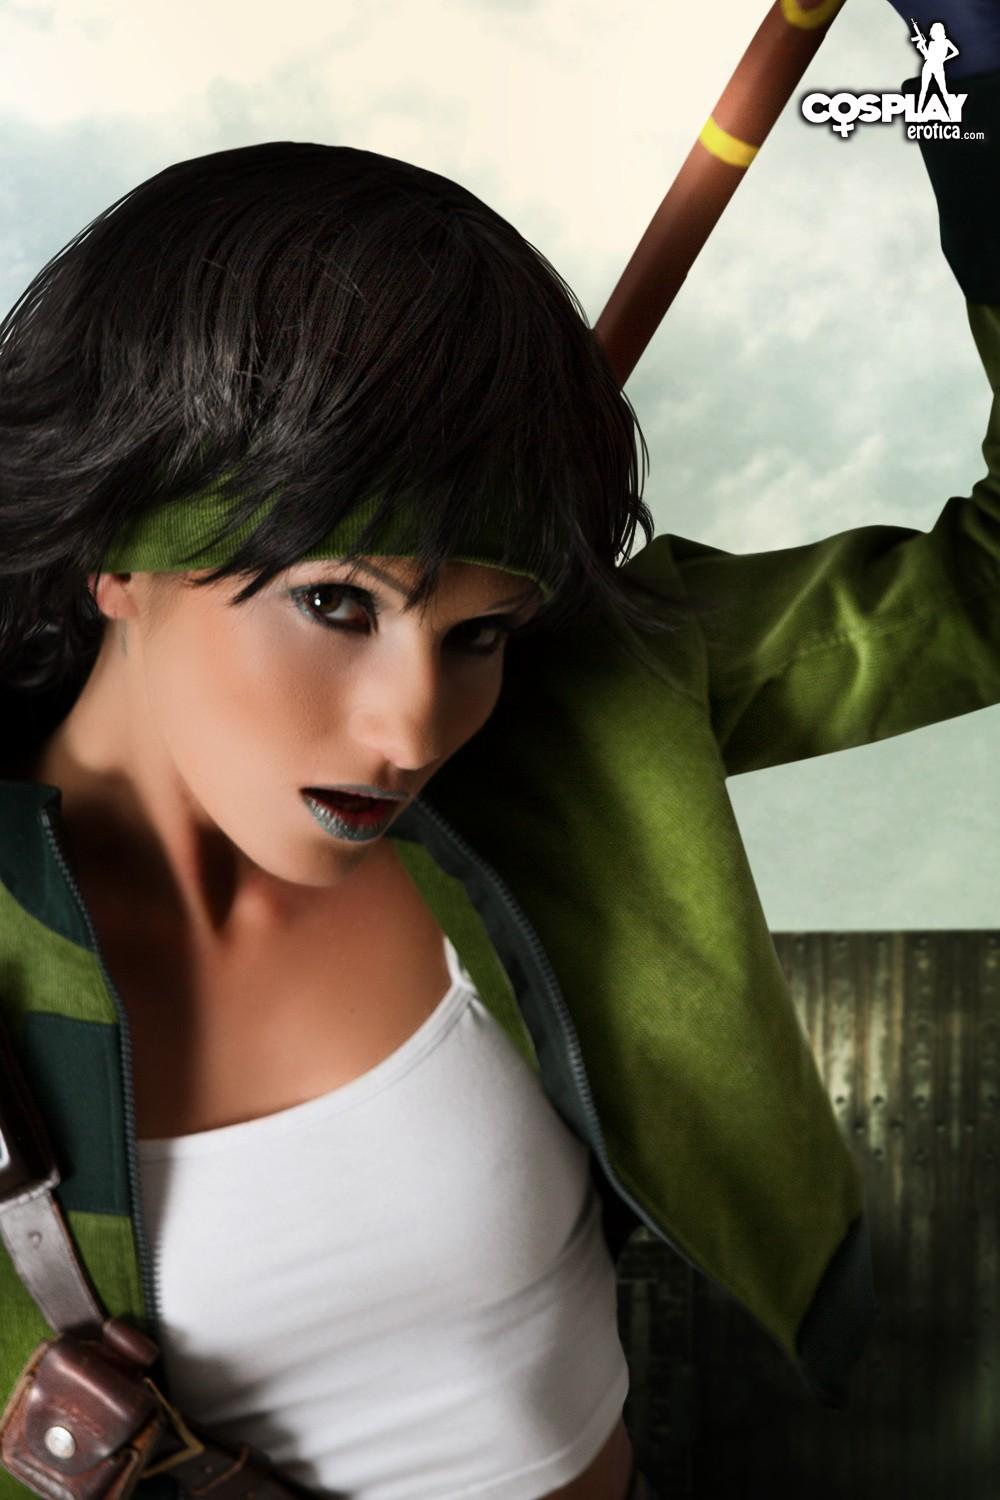 Cosplay hottie Zorah dresses up as Jade from Beyond Good and Evil #60210670